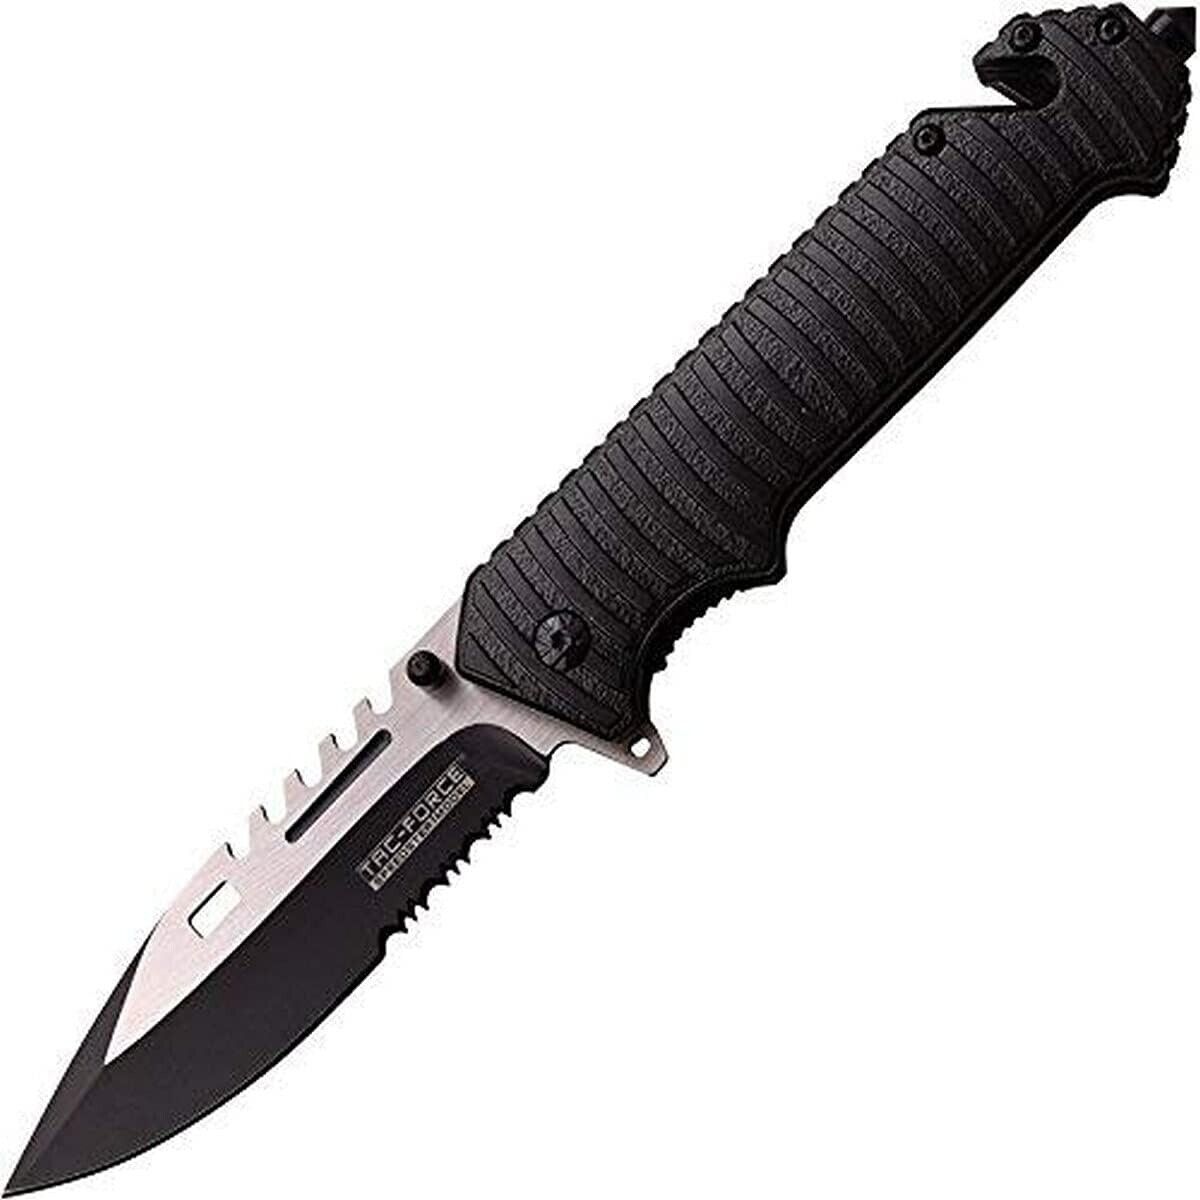 Outdoor Camping Folding Pocket Knife Tactical Spring Assisted Blade Hunting